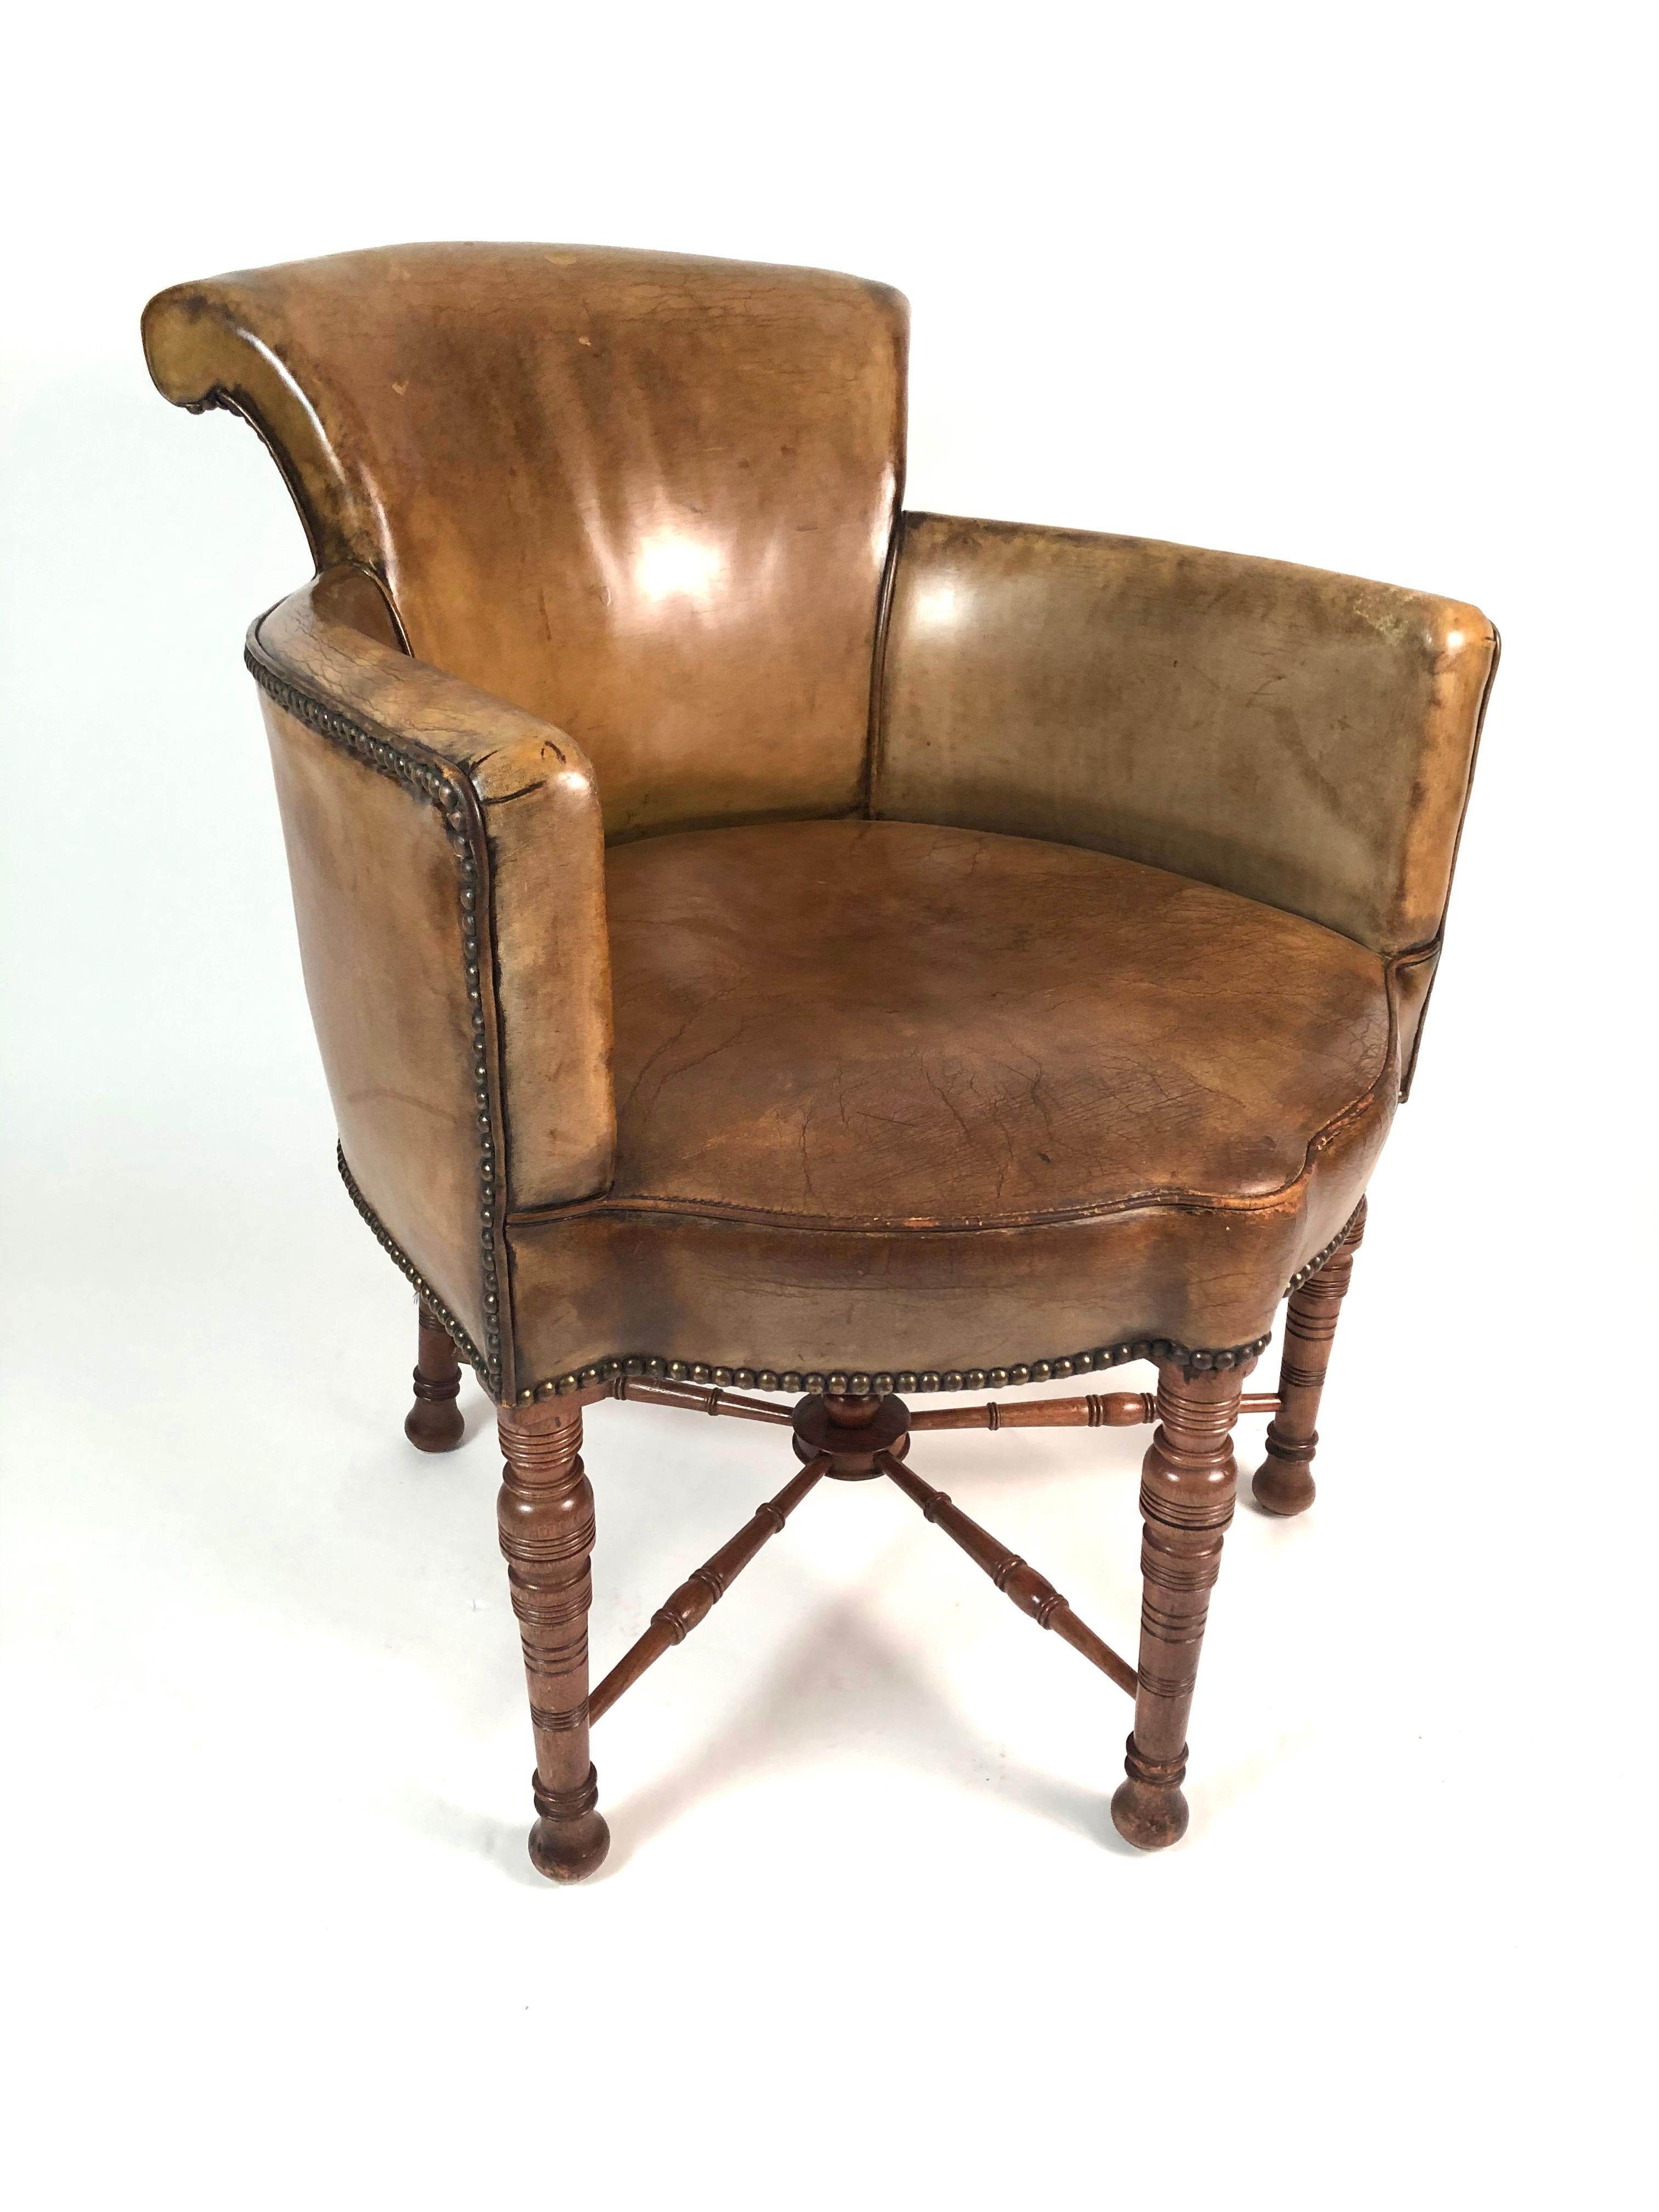 A 19th century English library chair, Aesthetic Movement period, upholstered in olive green leather, with scrolled back, curved arms and a shaped seat supported by four incised, ring- turned legs joined by cross stretchers, circa 1875. Comfortable